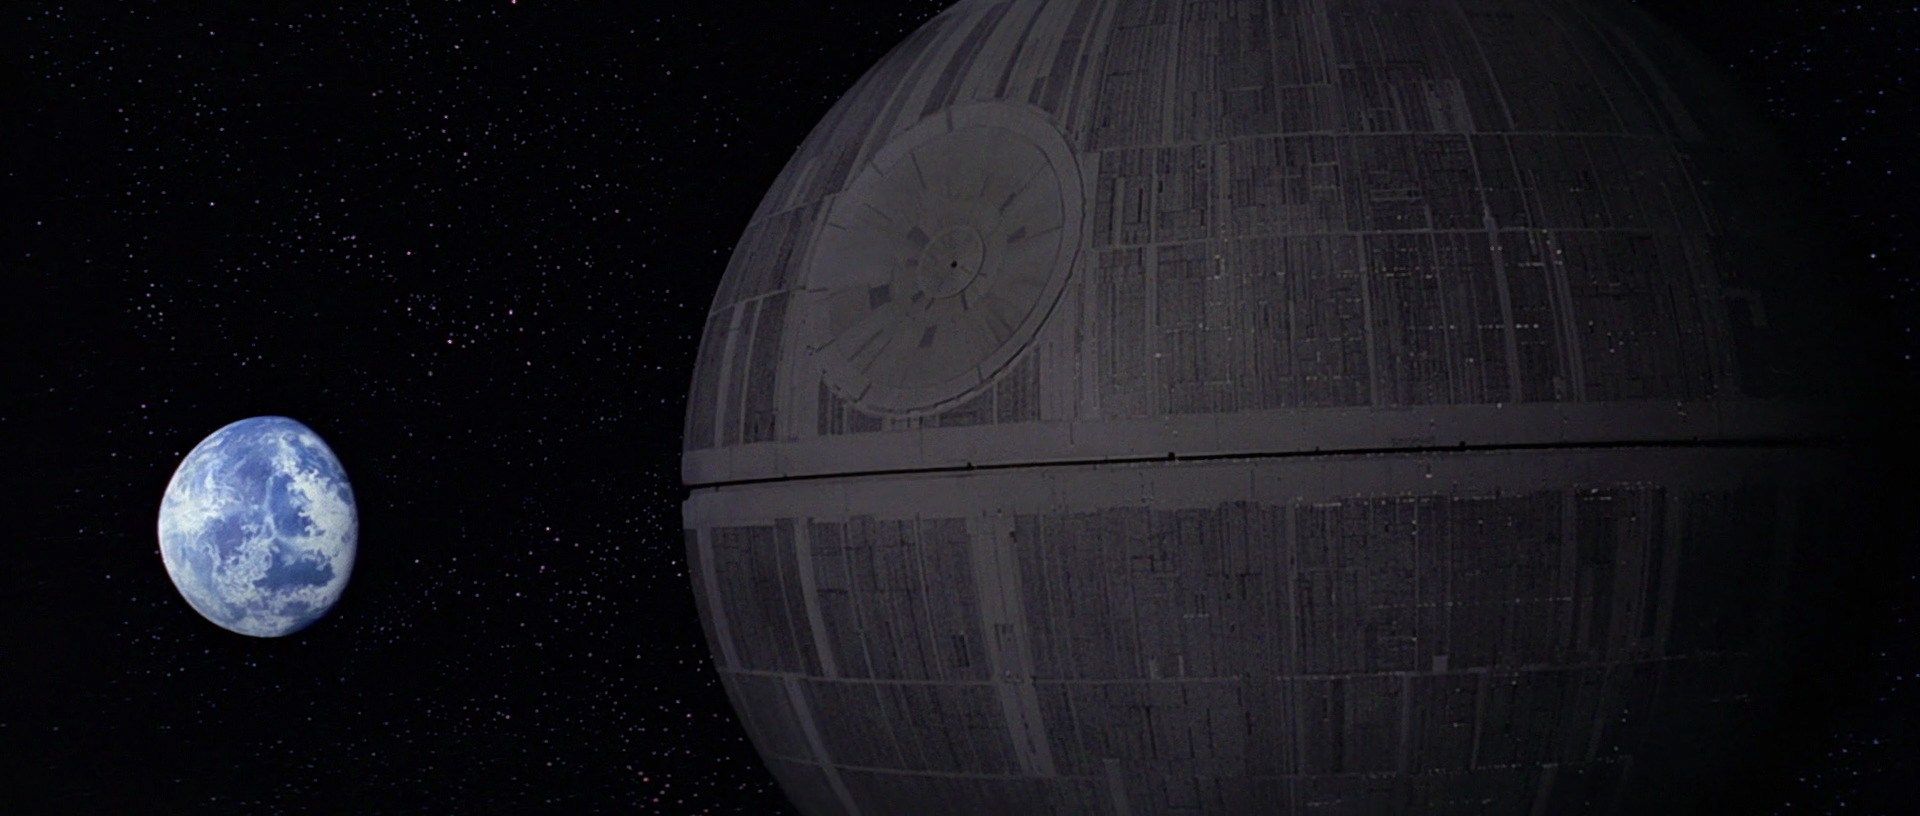 That Death Star Wreckage in Star Wars Episode IX is Probably the First Death Star